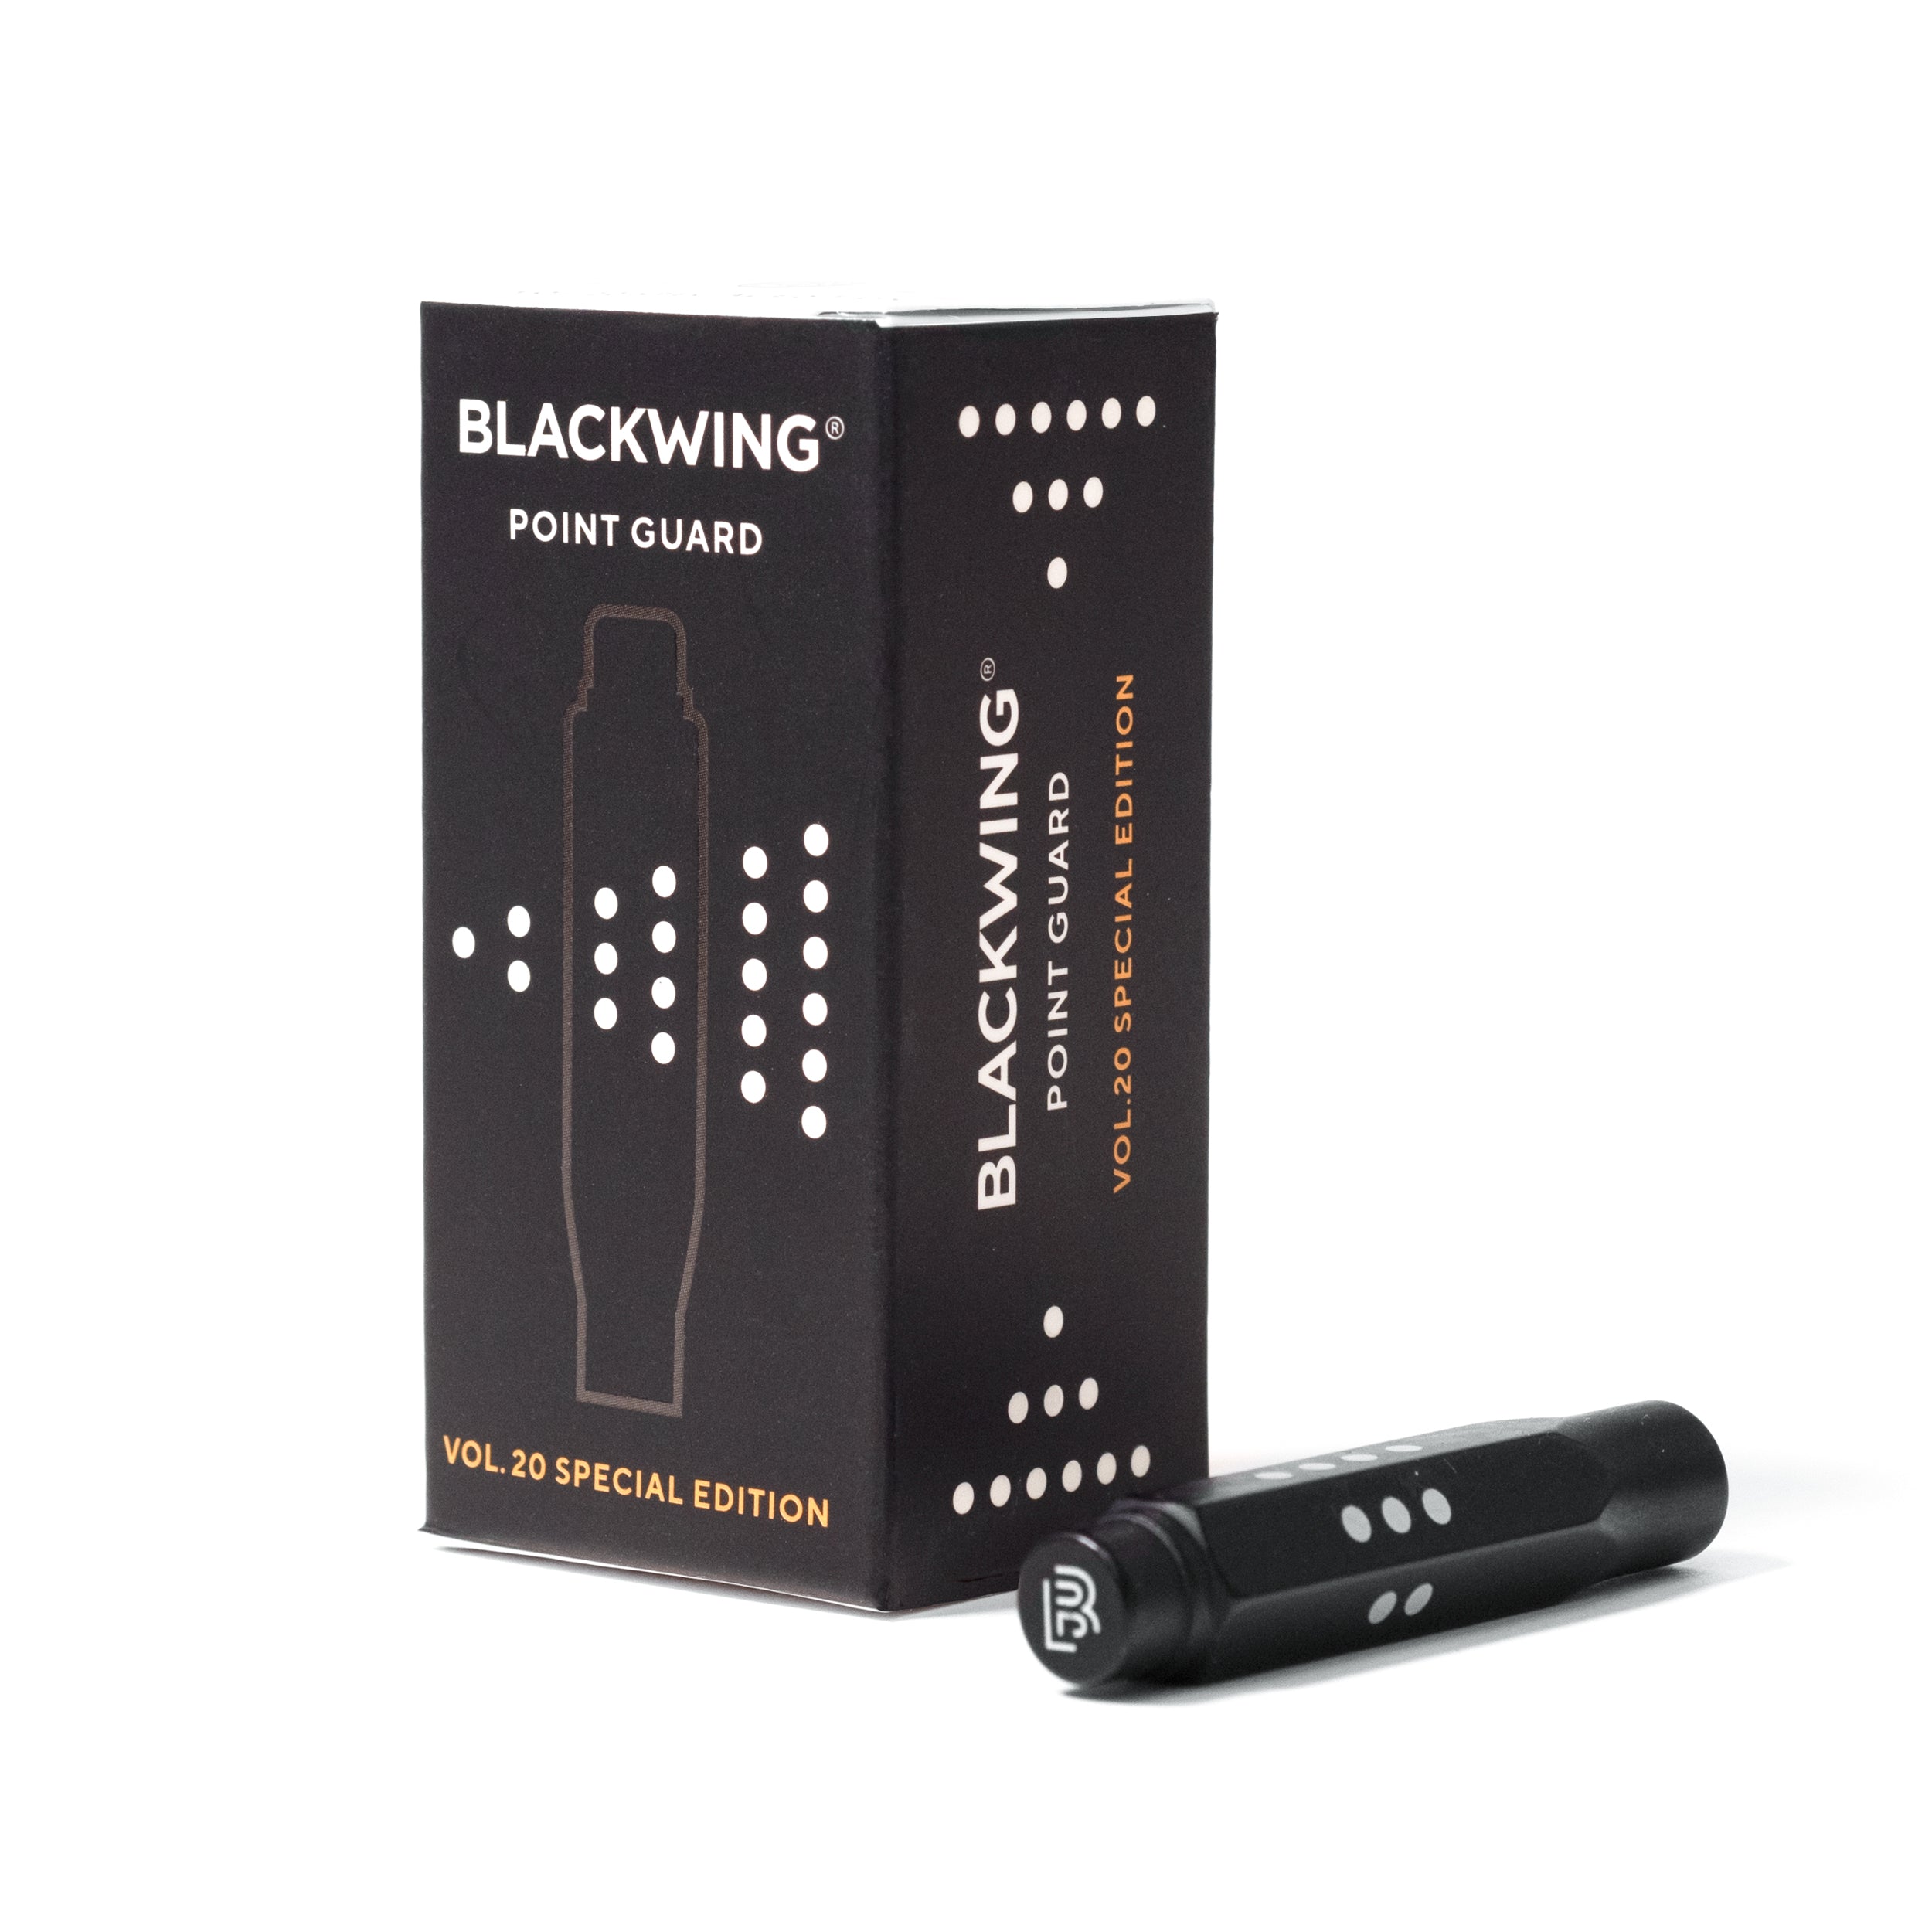 Blackwing Volume 20 - D6 Point Guard pencil cap with packaging, vol. 20 special edition - tabletop games.